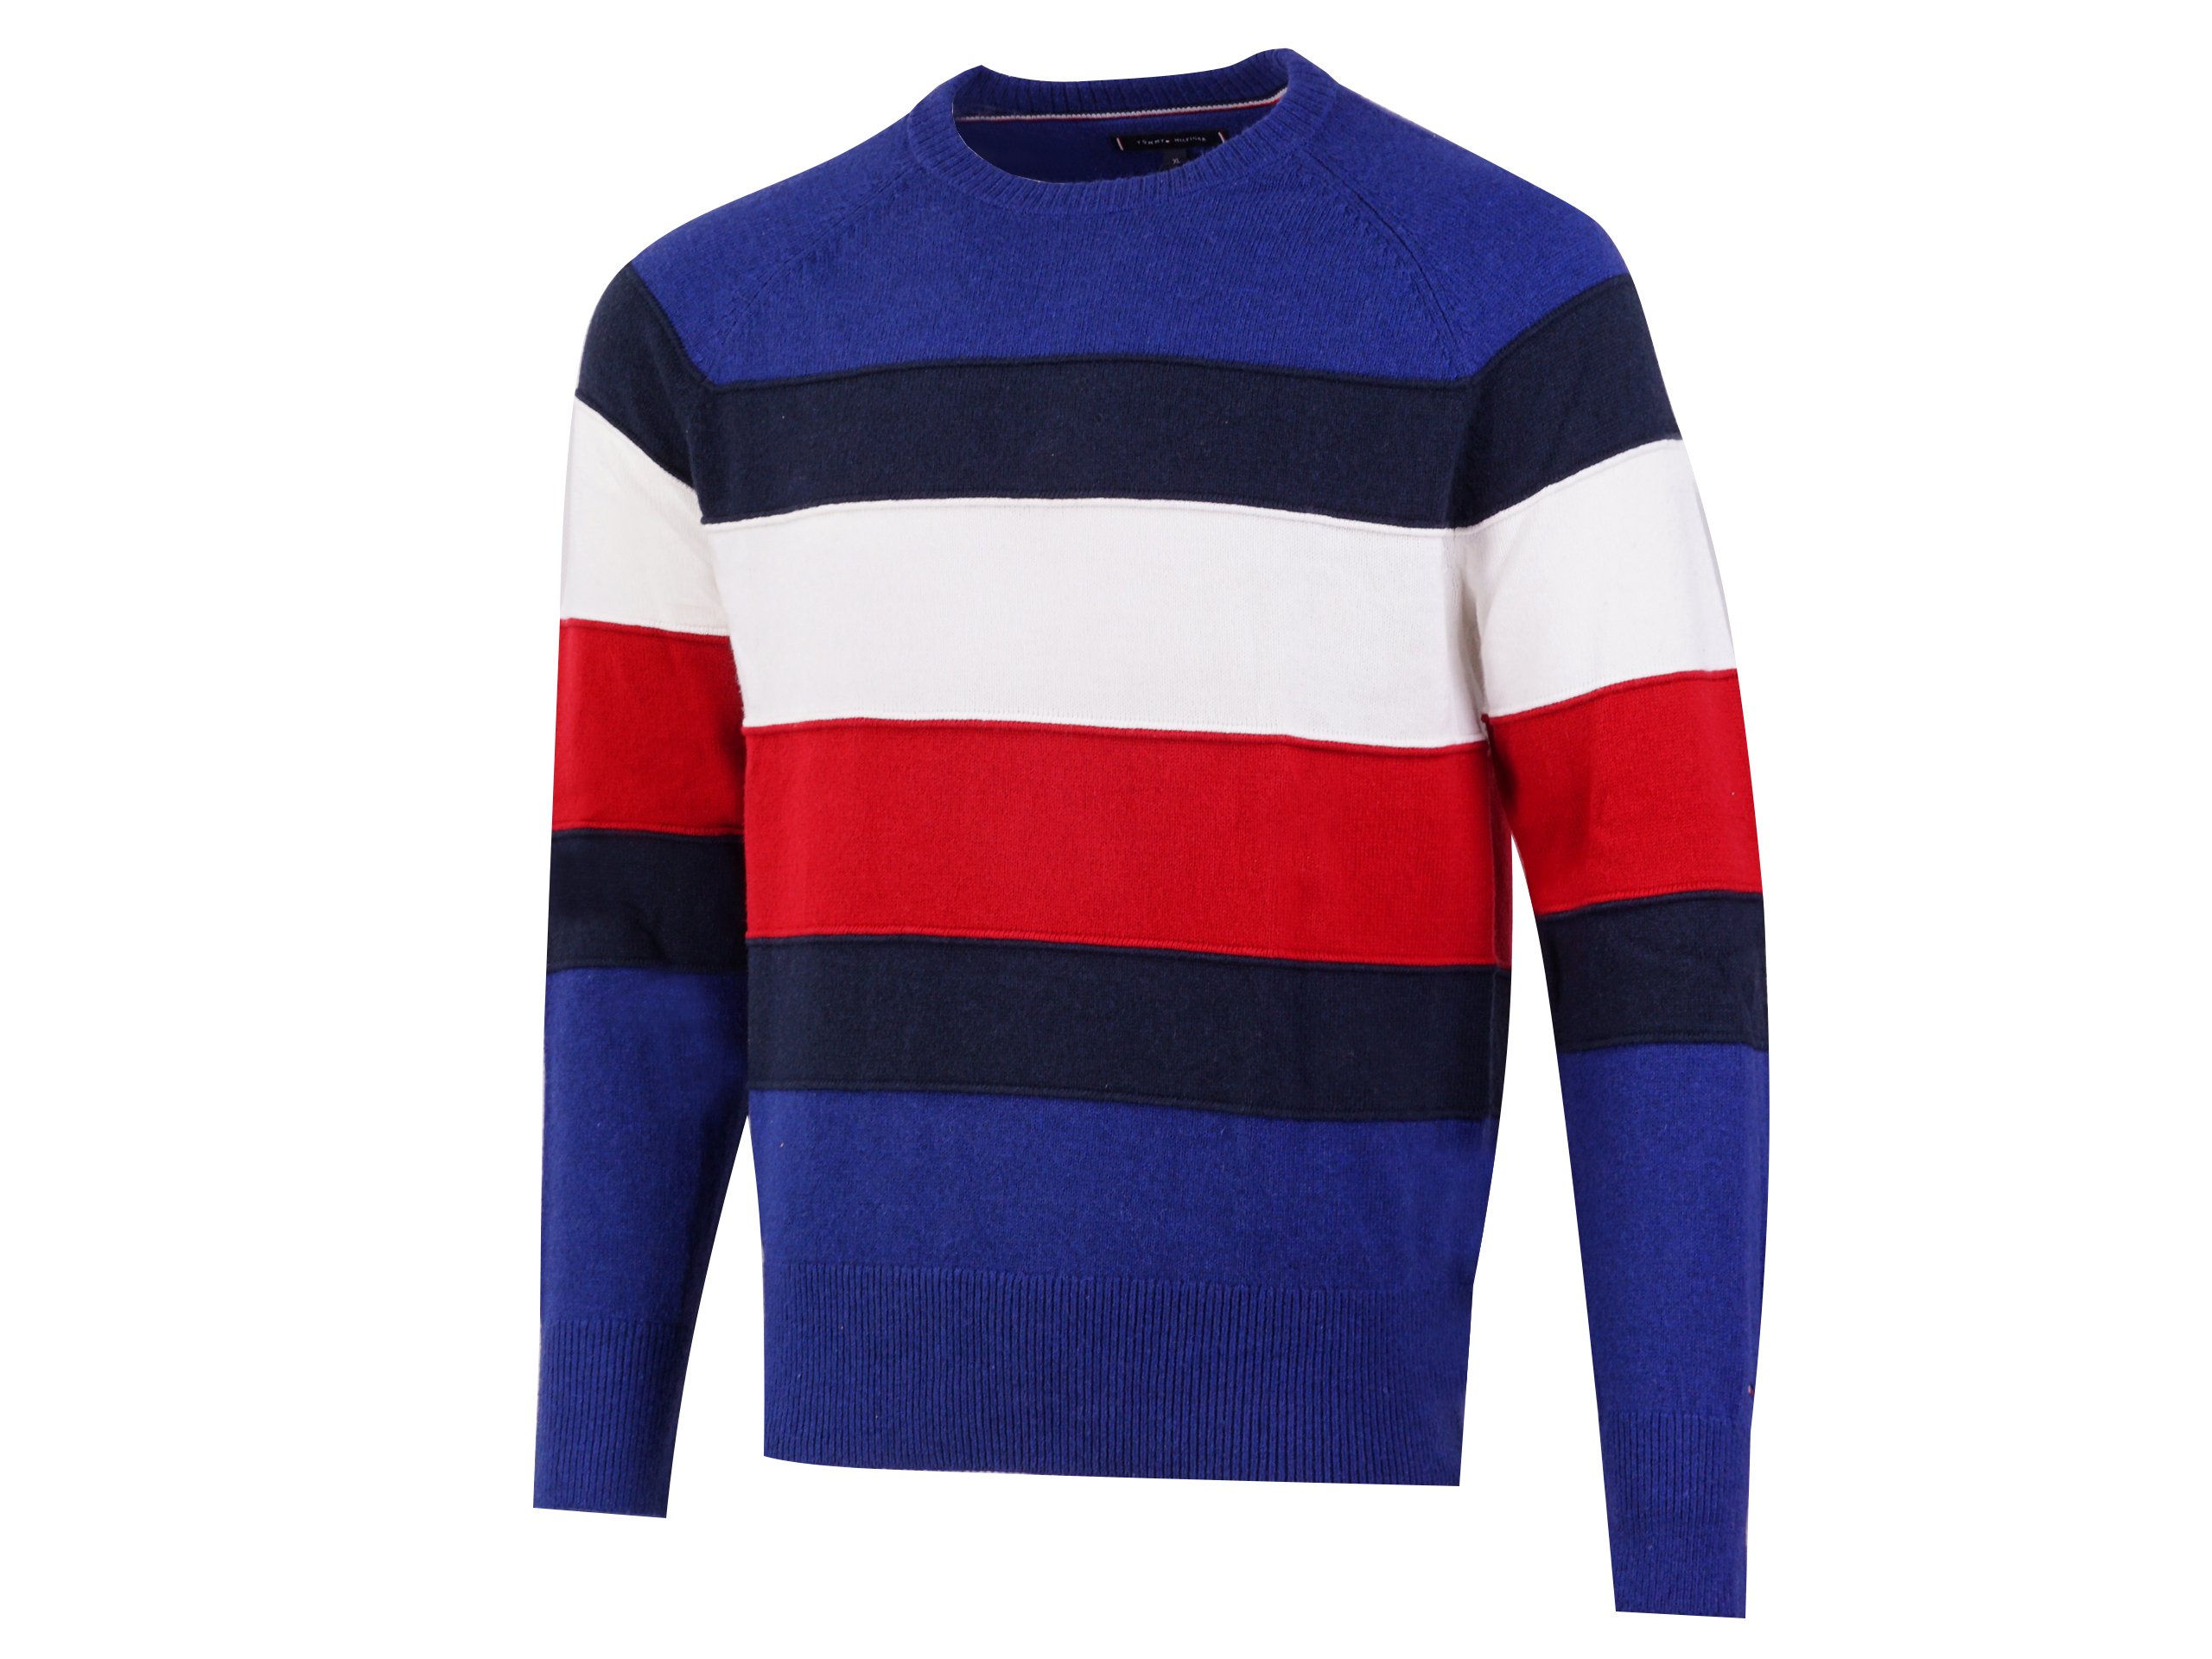 Tommy Hilfiger - Colorblock Stripe MW0MW07853-436 - Sweater - Navy / Blue /  Red / White | Mens \\ Tommy Hilfiger | Kicks Sport - a trusted supplier of  branded sports footwear